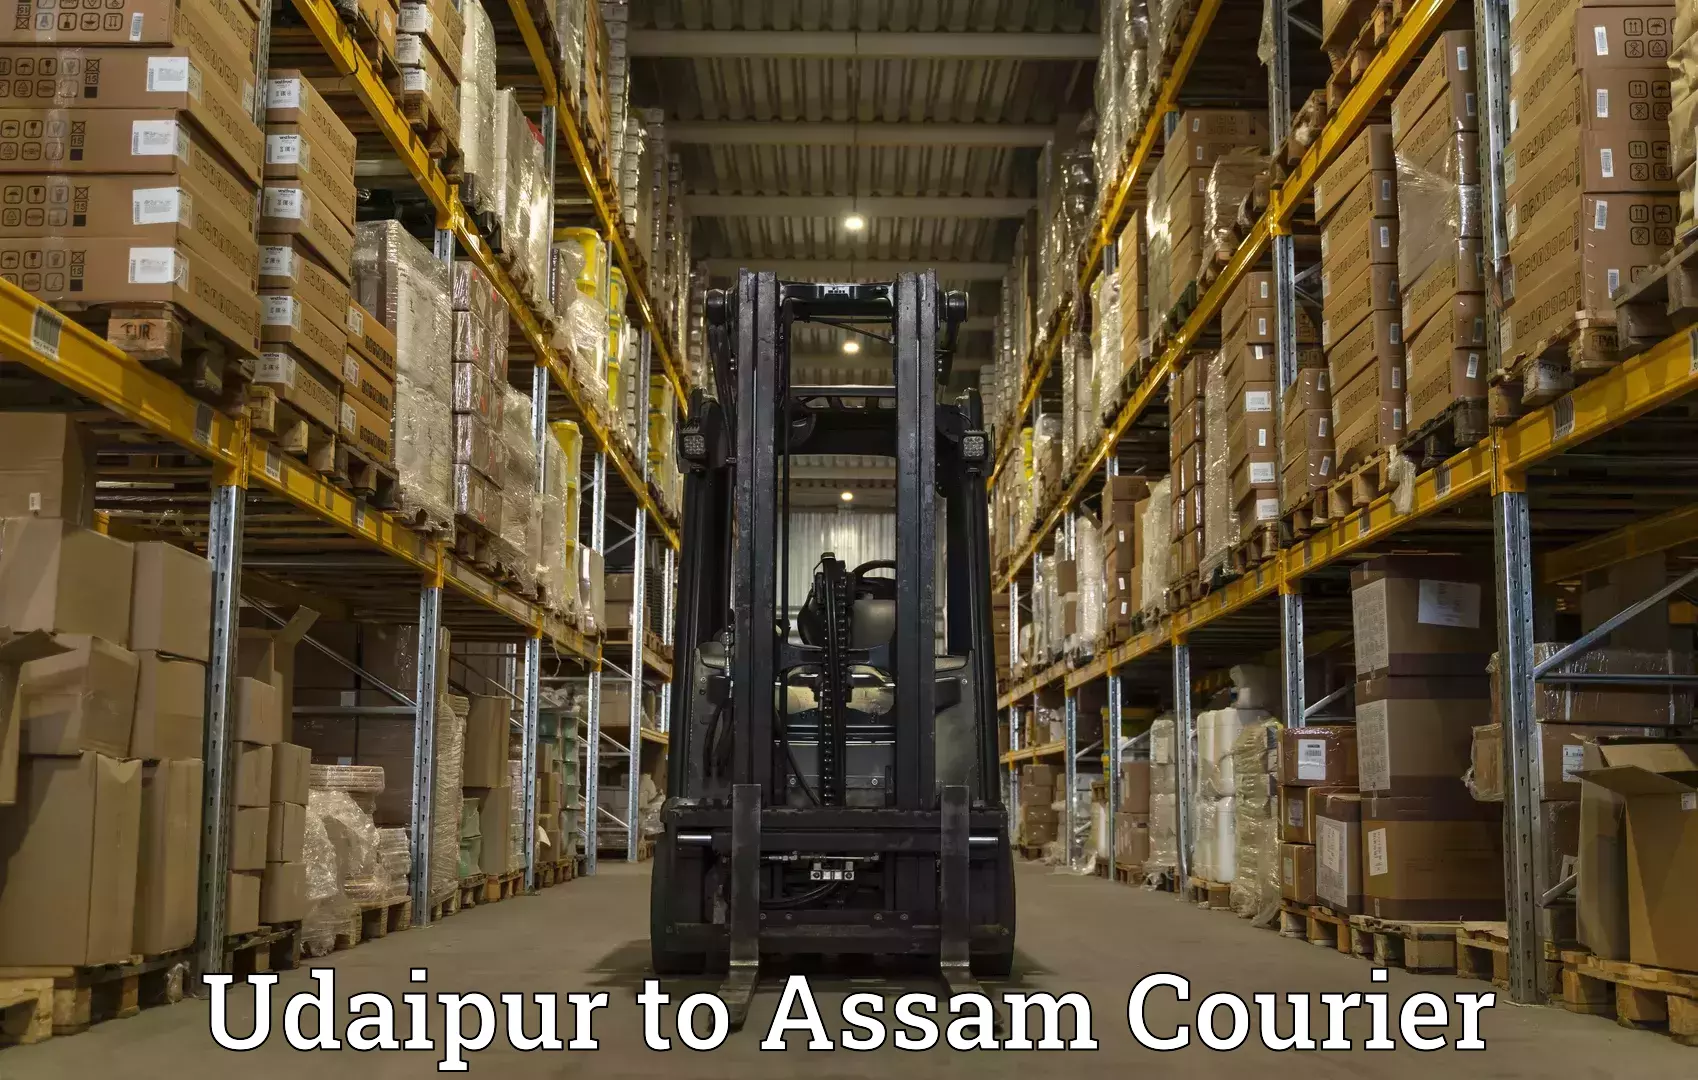 Delivery service partnership Udaipur to Assam